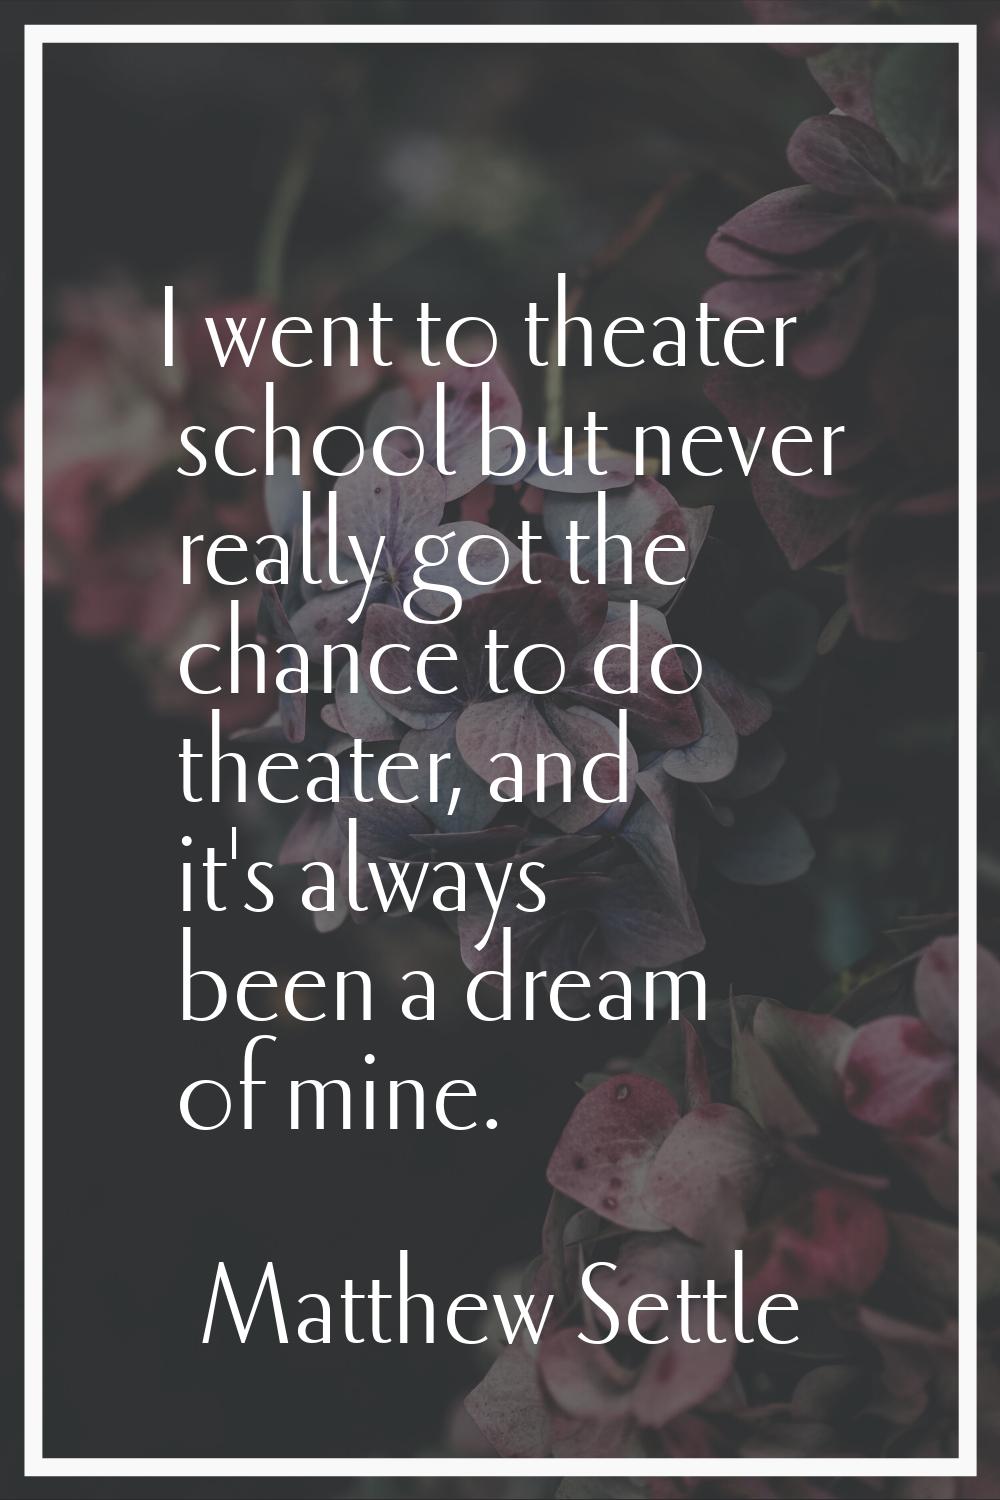 I went to theater school but never really got the chance to do theater, and it's always been a drea